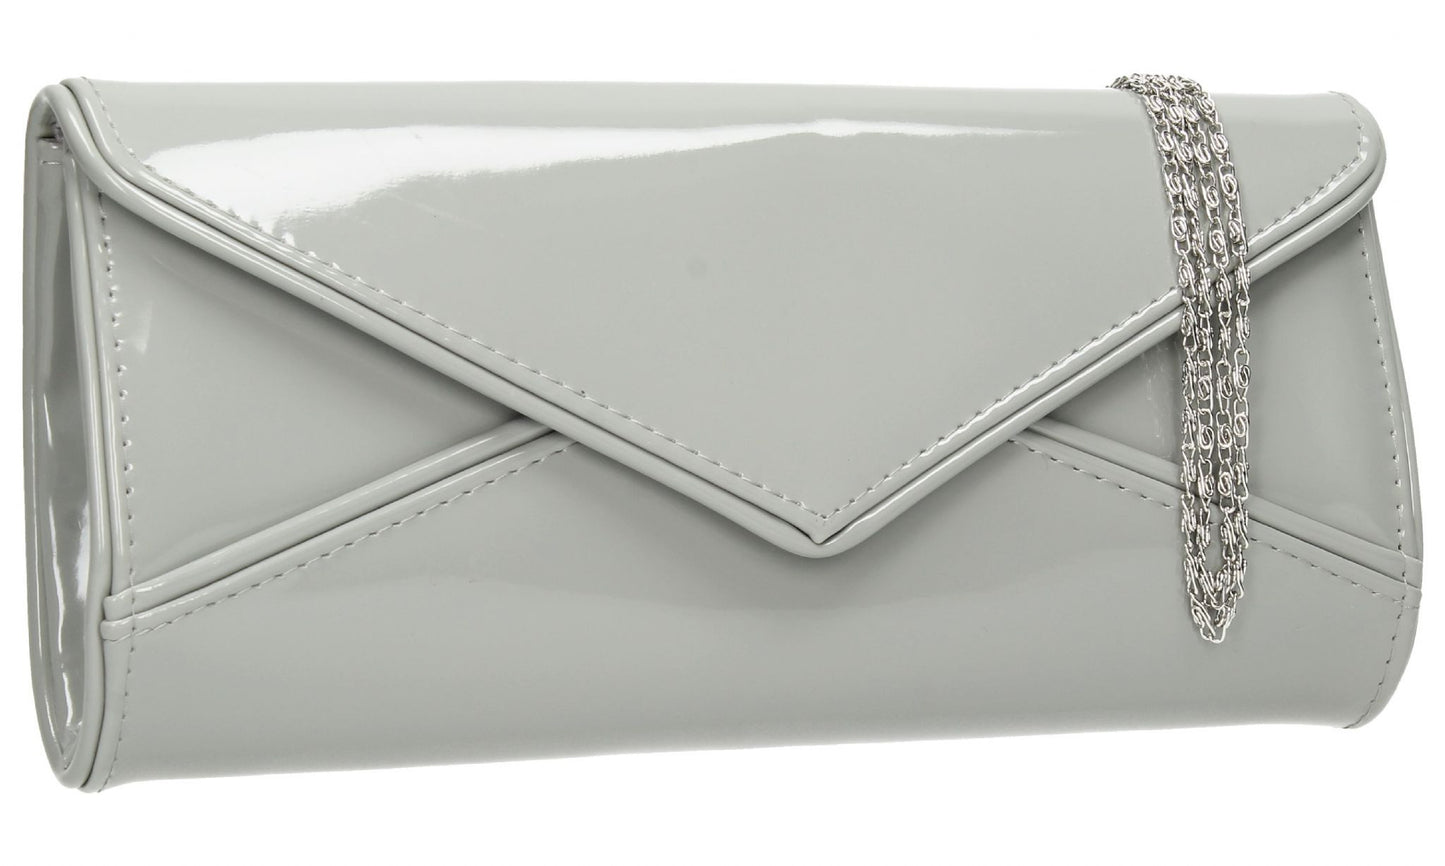 SWANKYSWANS Perry Patent Clutch Bag - Grey Cute Cheap Clutch Bag For Weddings School and Work